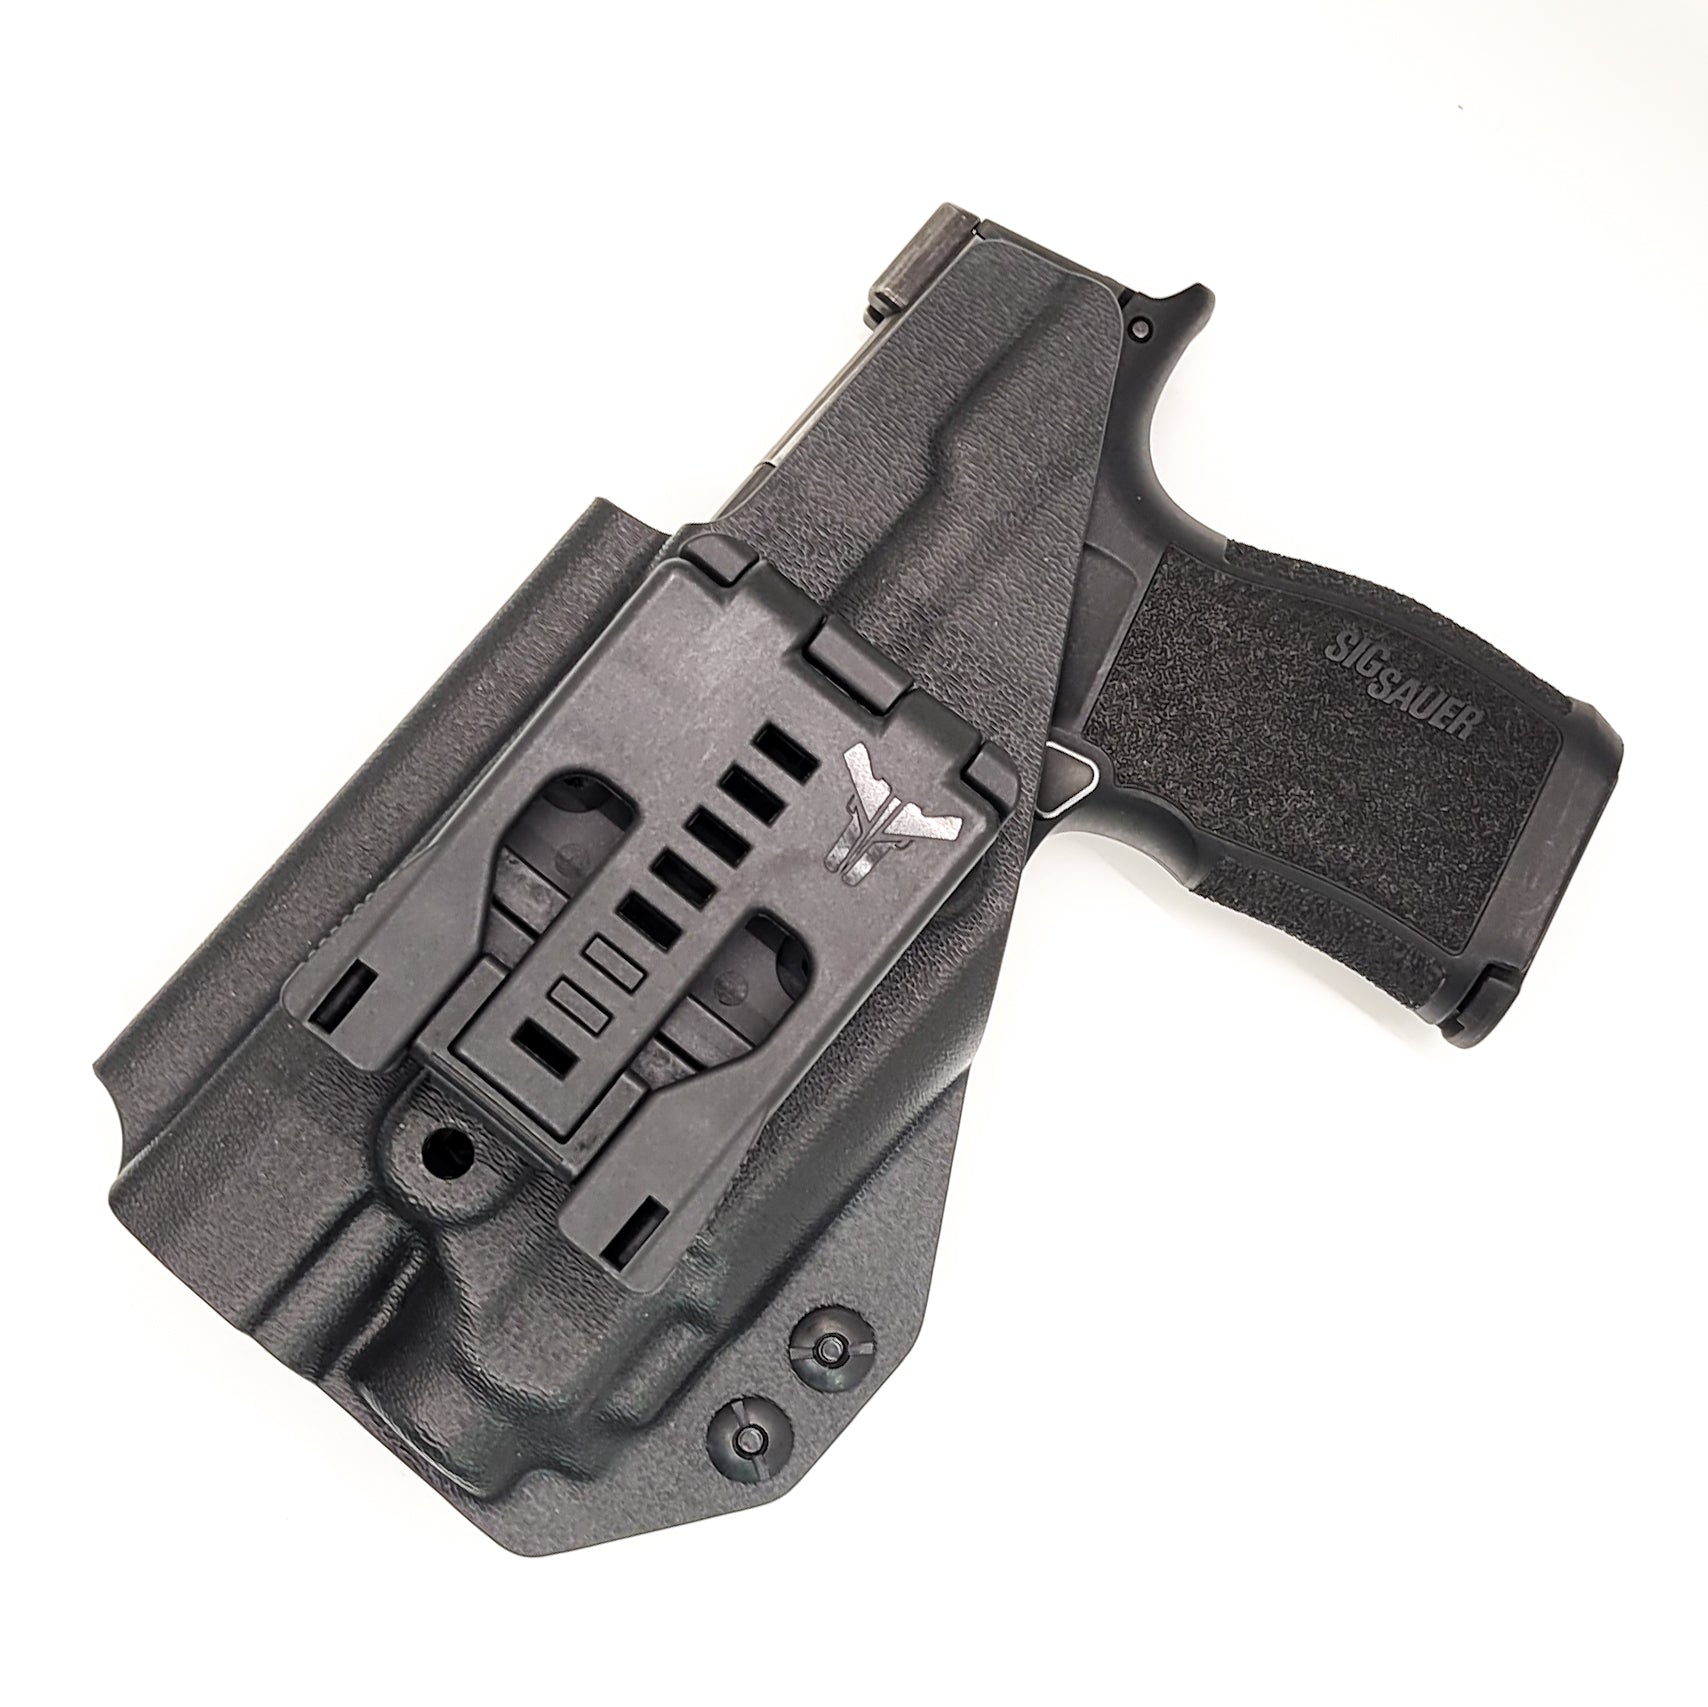 For the best Outside Waistband OWB Kydex Holster designed to fit the Sig Sauer P365 or P365XL with Streamlight TLR-8 Sub, shop Four Brothers Holsters.  Full sweat guard, adjustable retention, Smooth edges to reduce printing. Made in the USA. Open muzzle for threaded barrels cleared for red dot sights. P 365 XL 